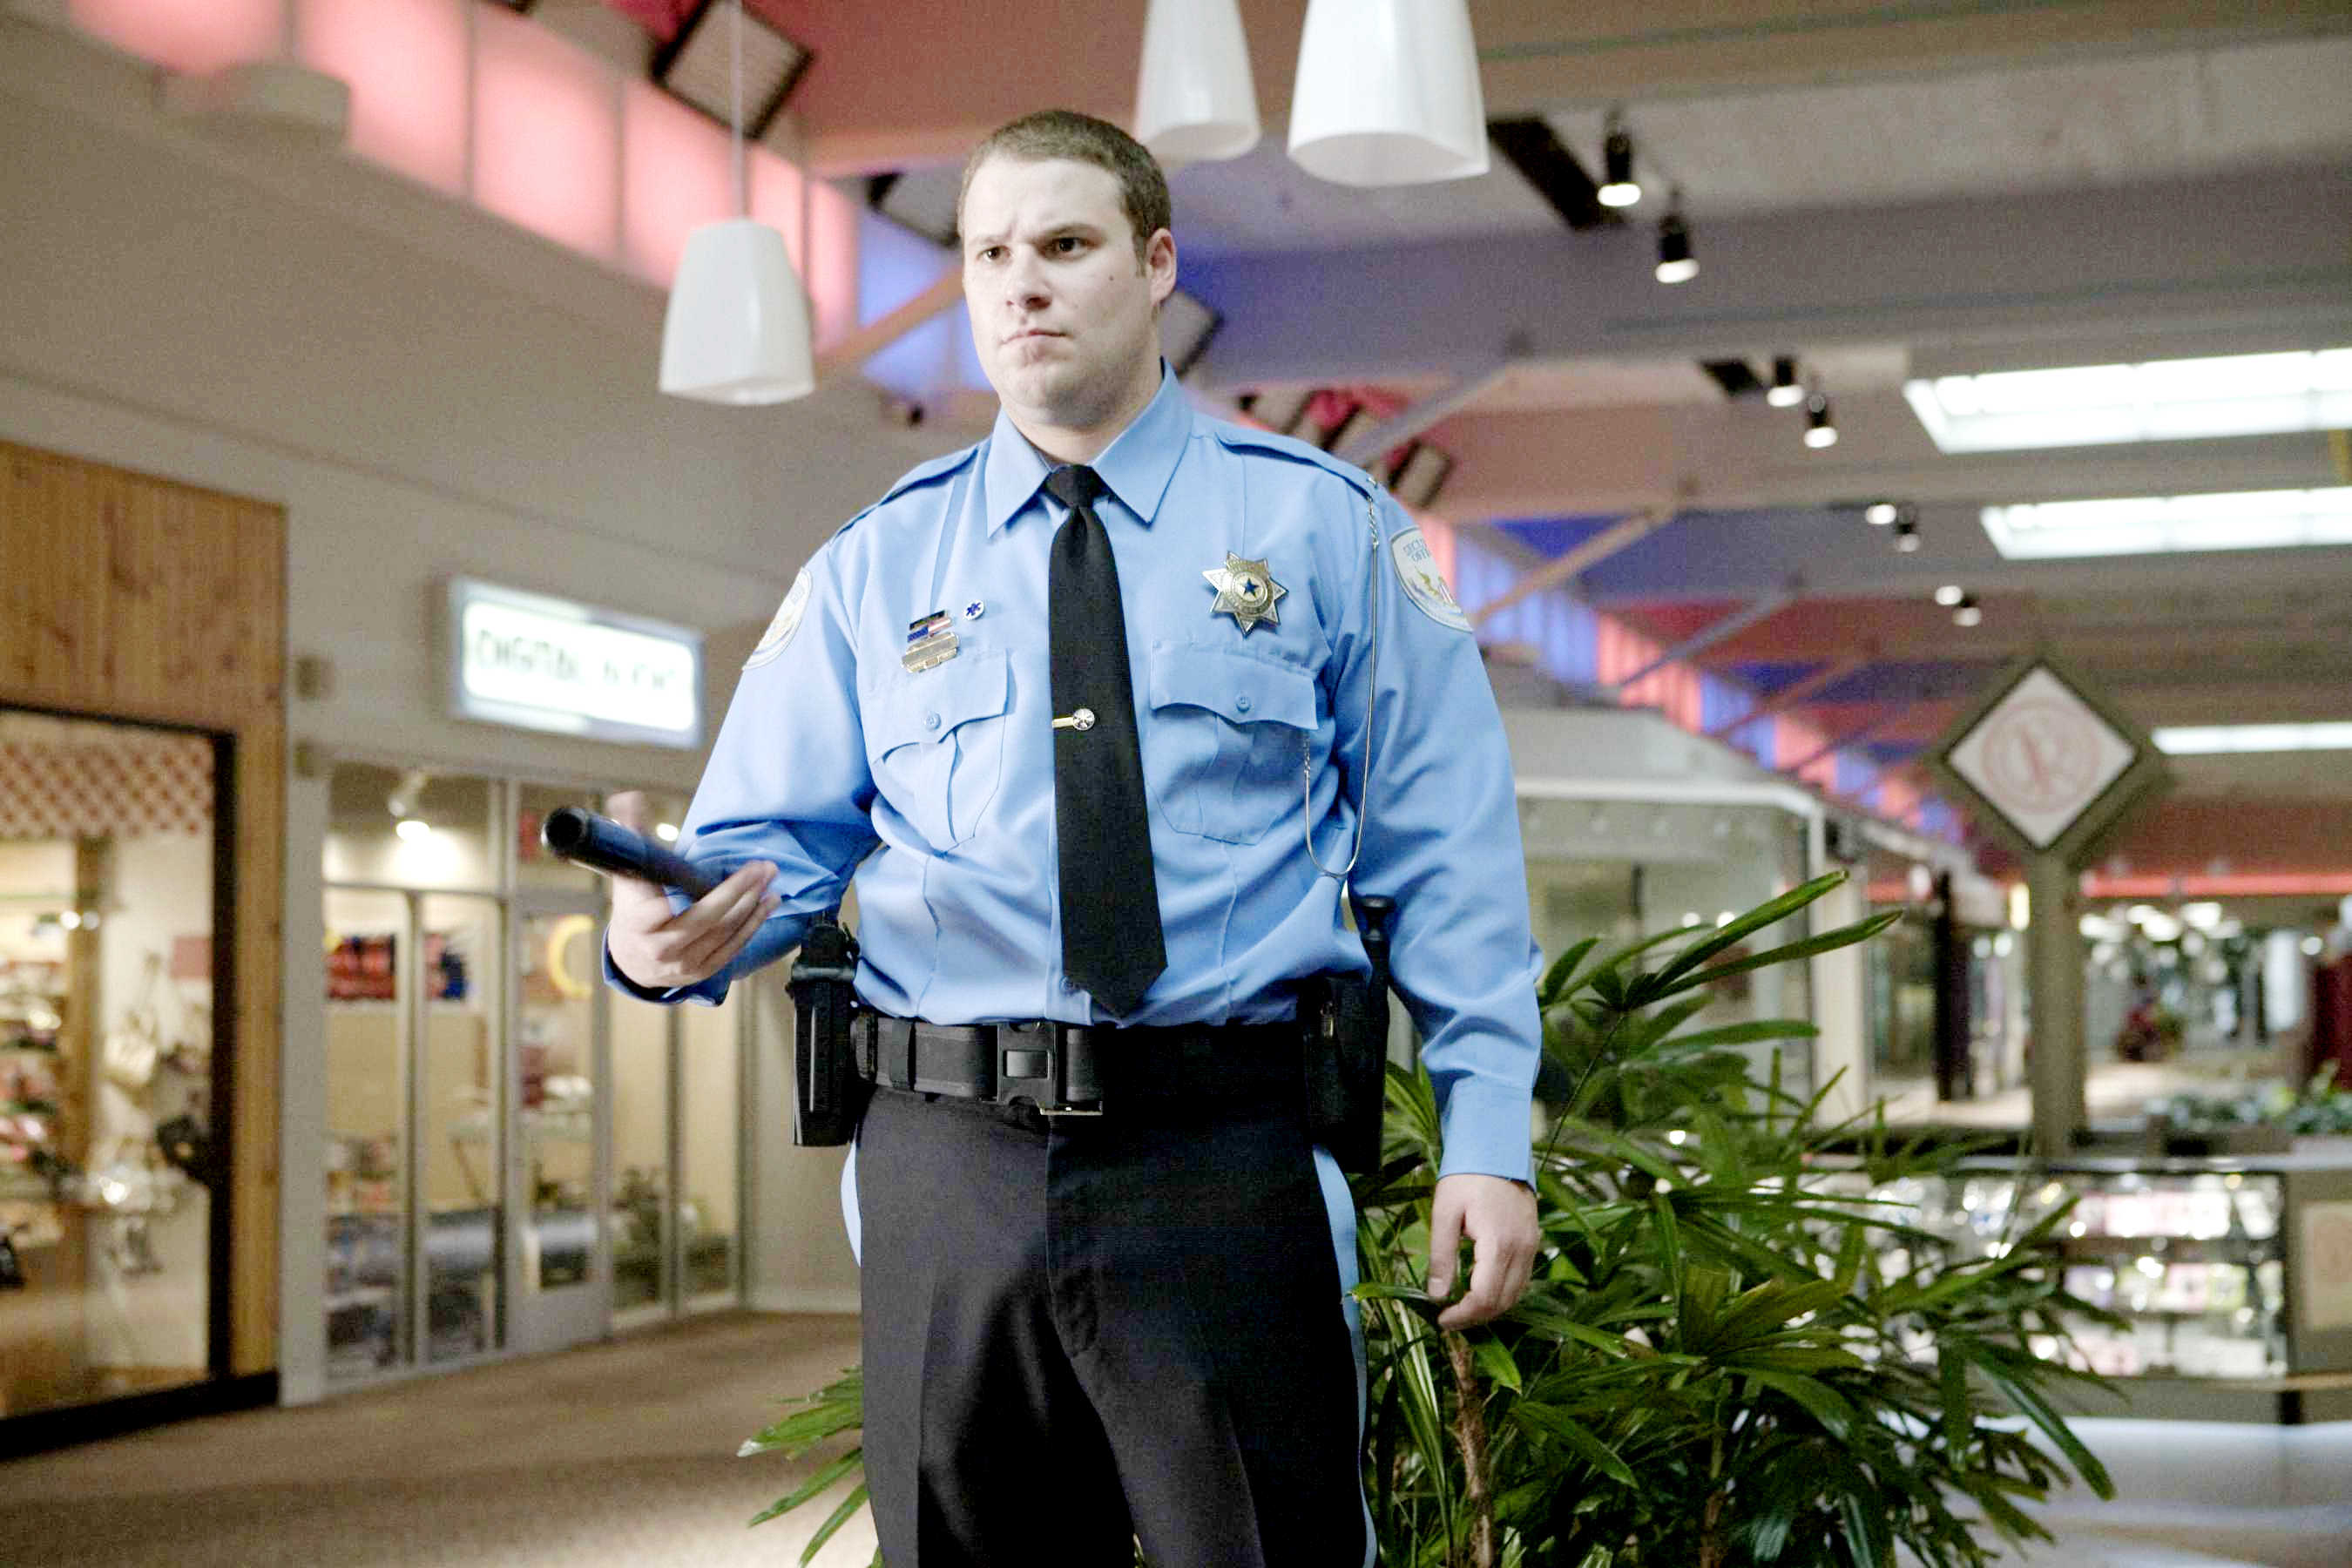 Seth Rogen stars as Ronnie Barnhardt in Warner Bros. Pictures' Observe and Report (2009). Photo credit by Peter Sorel.